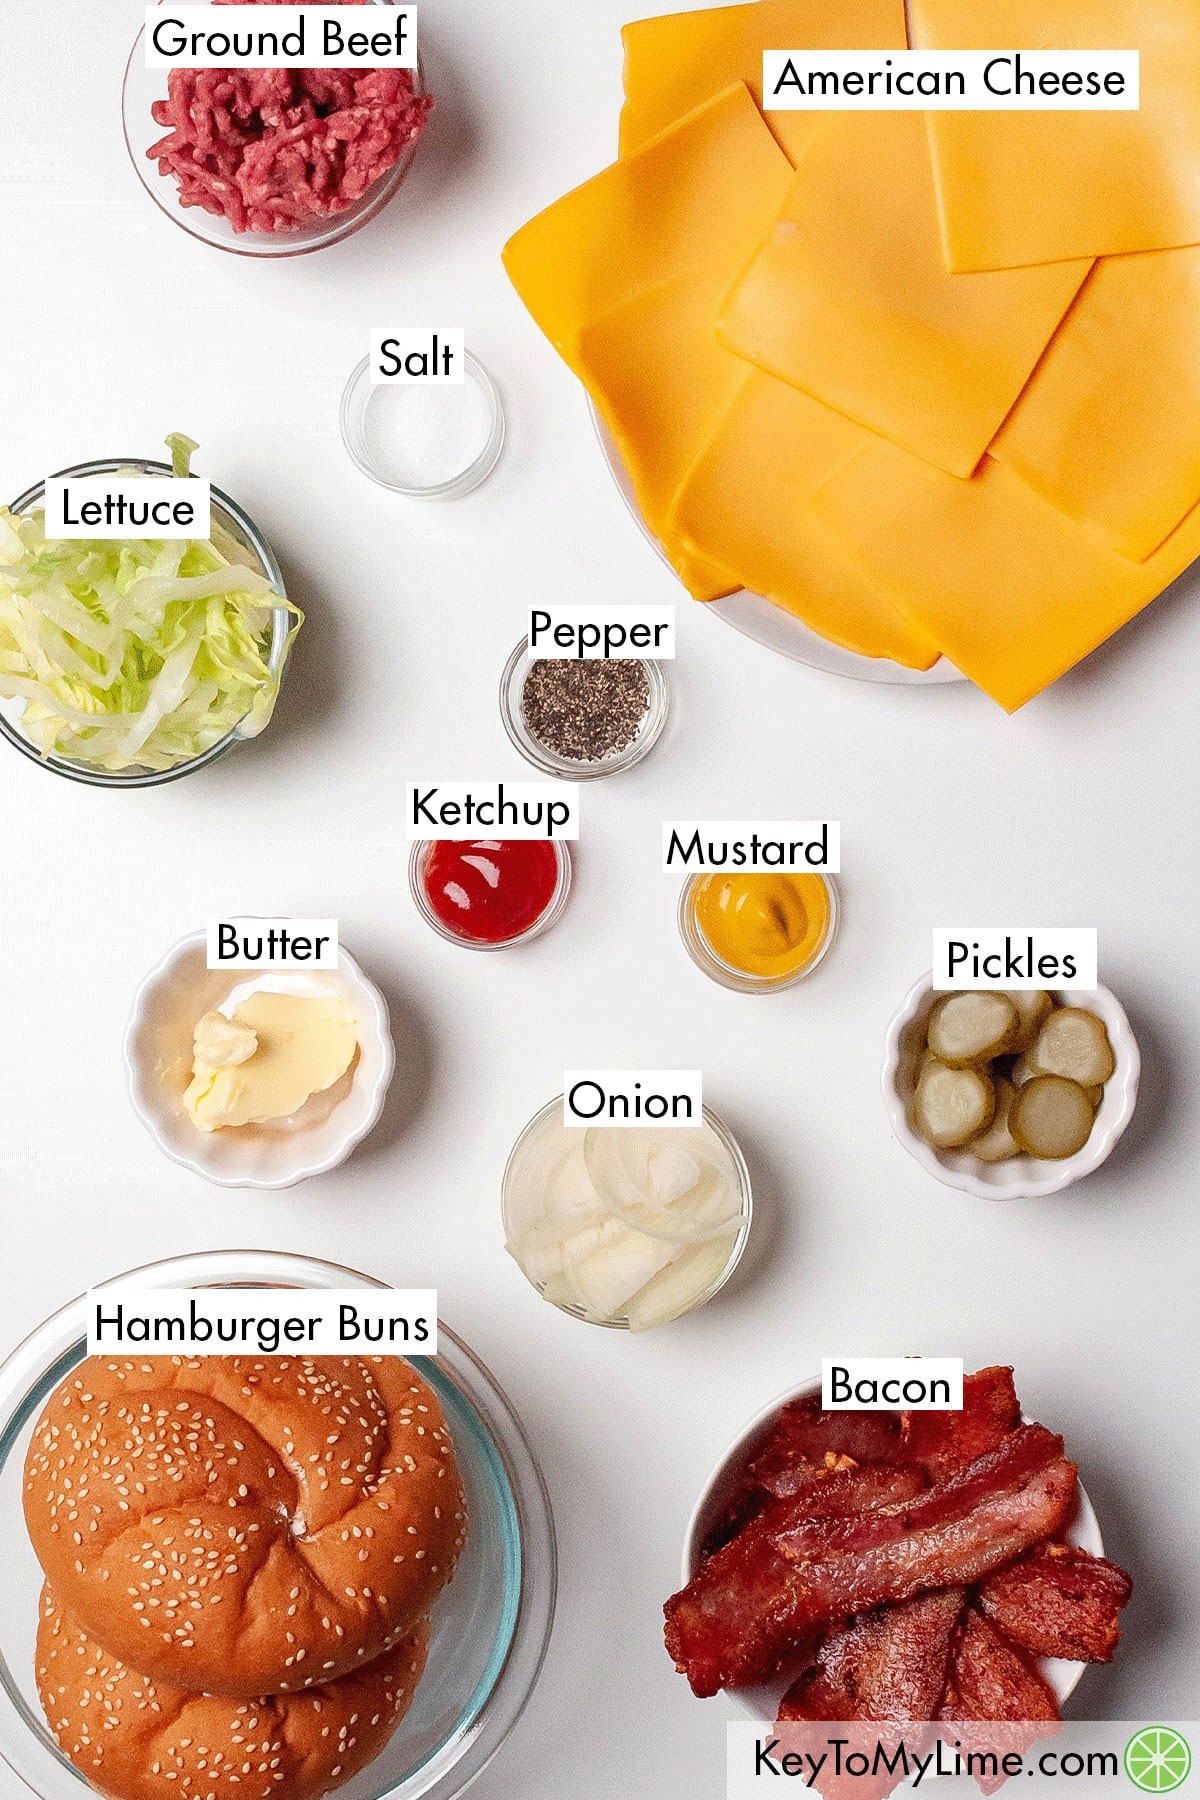 The labeled ingredients for a Travis Scott burger.